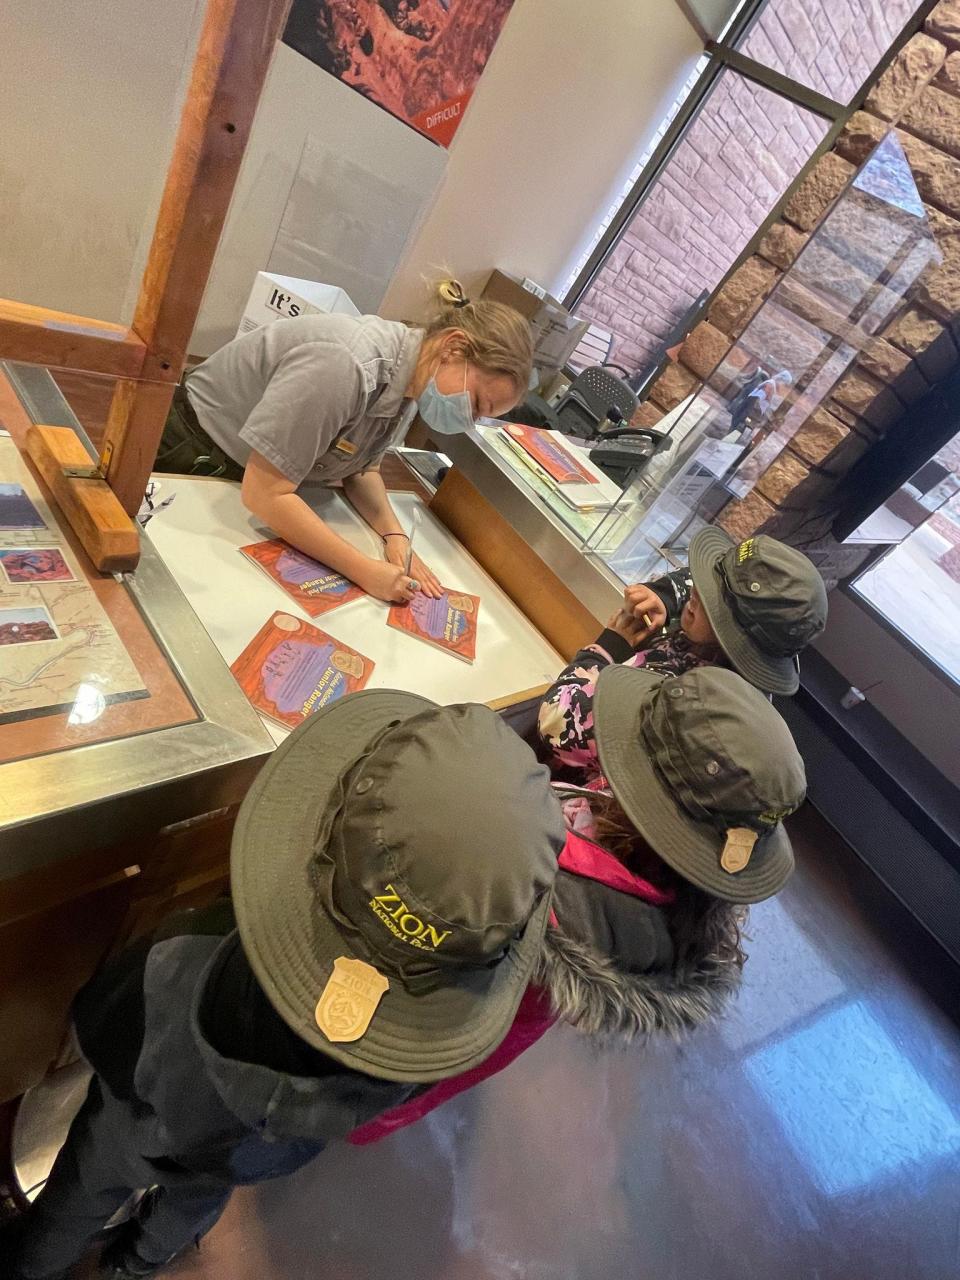 While the Junior Ranger program is designed for kids like Maya, Daniella and Jonathan Zrihen, visitors of any age are invited to take part in the educational activities and pledge to help protect national parks.